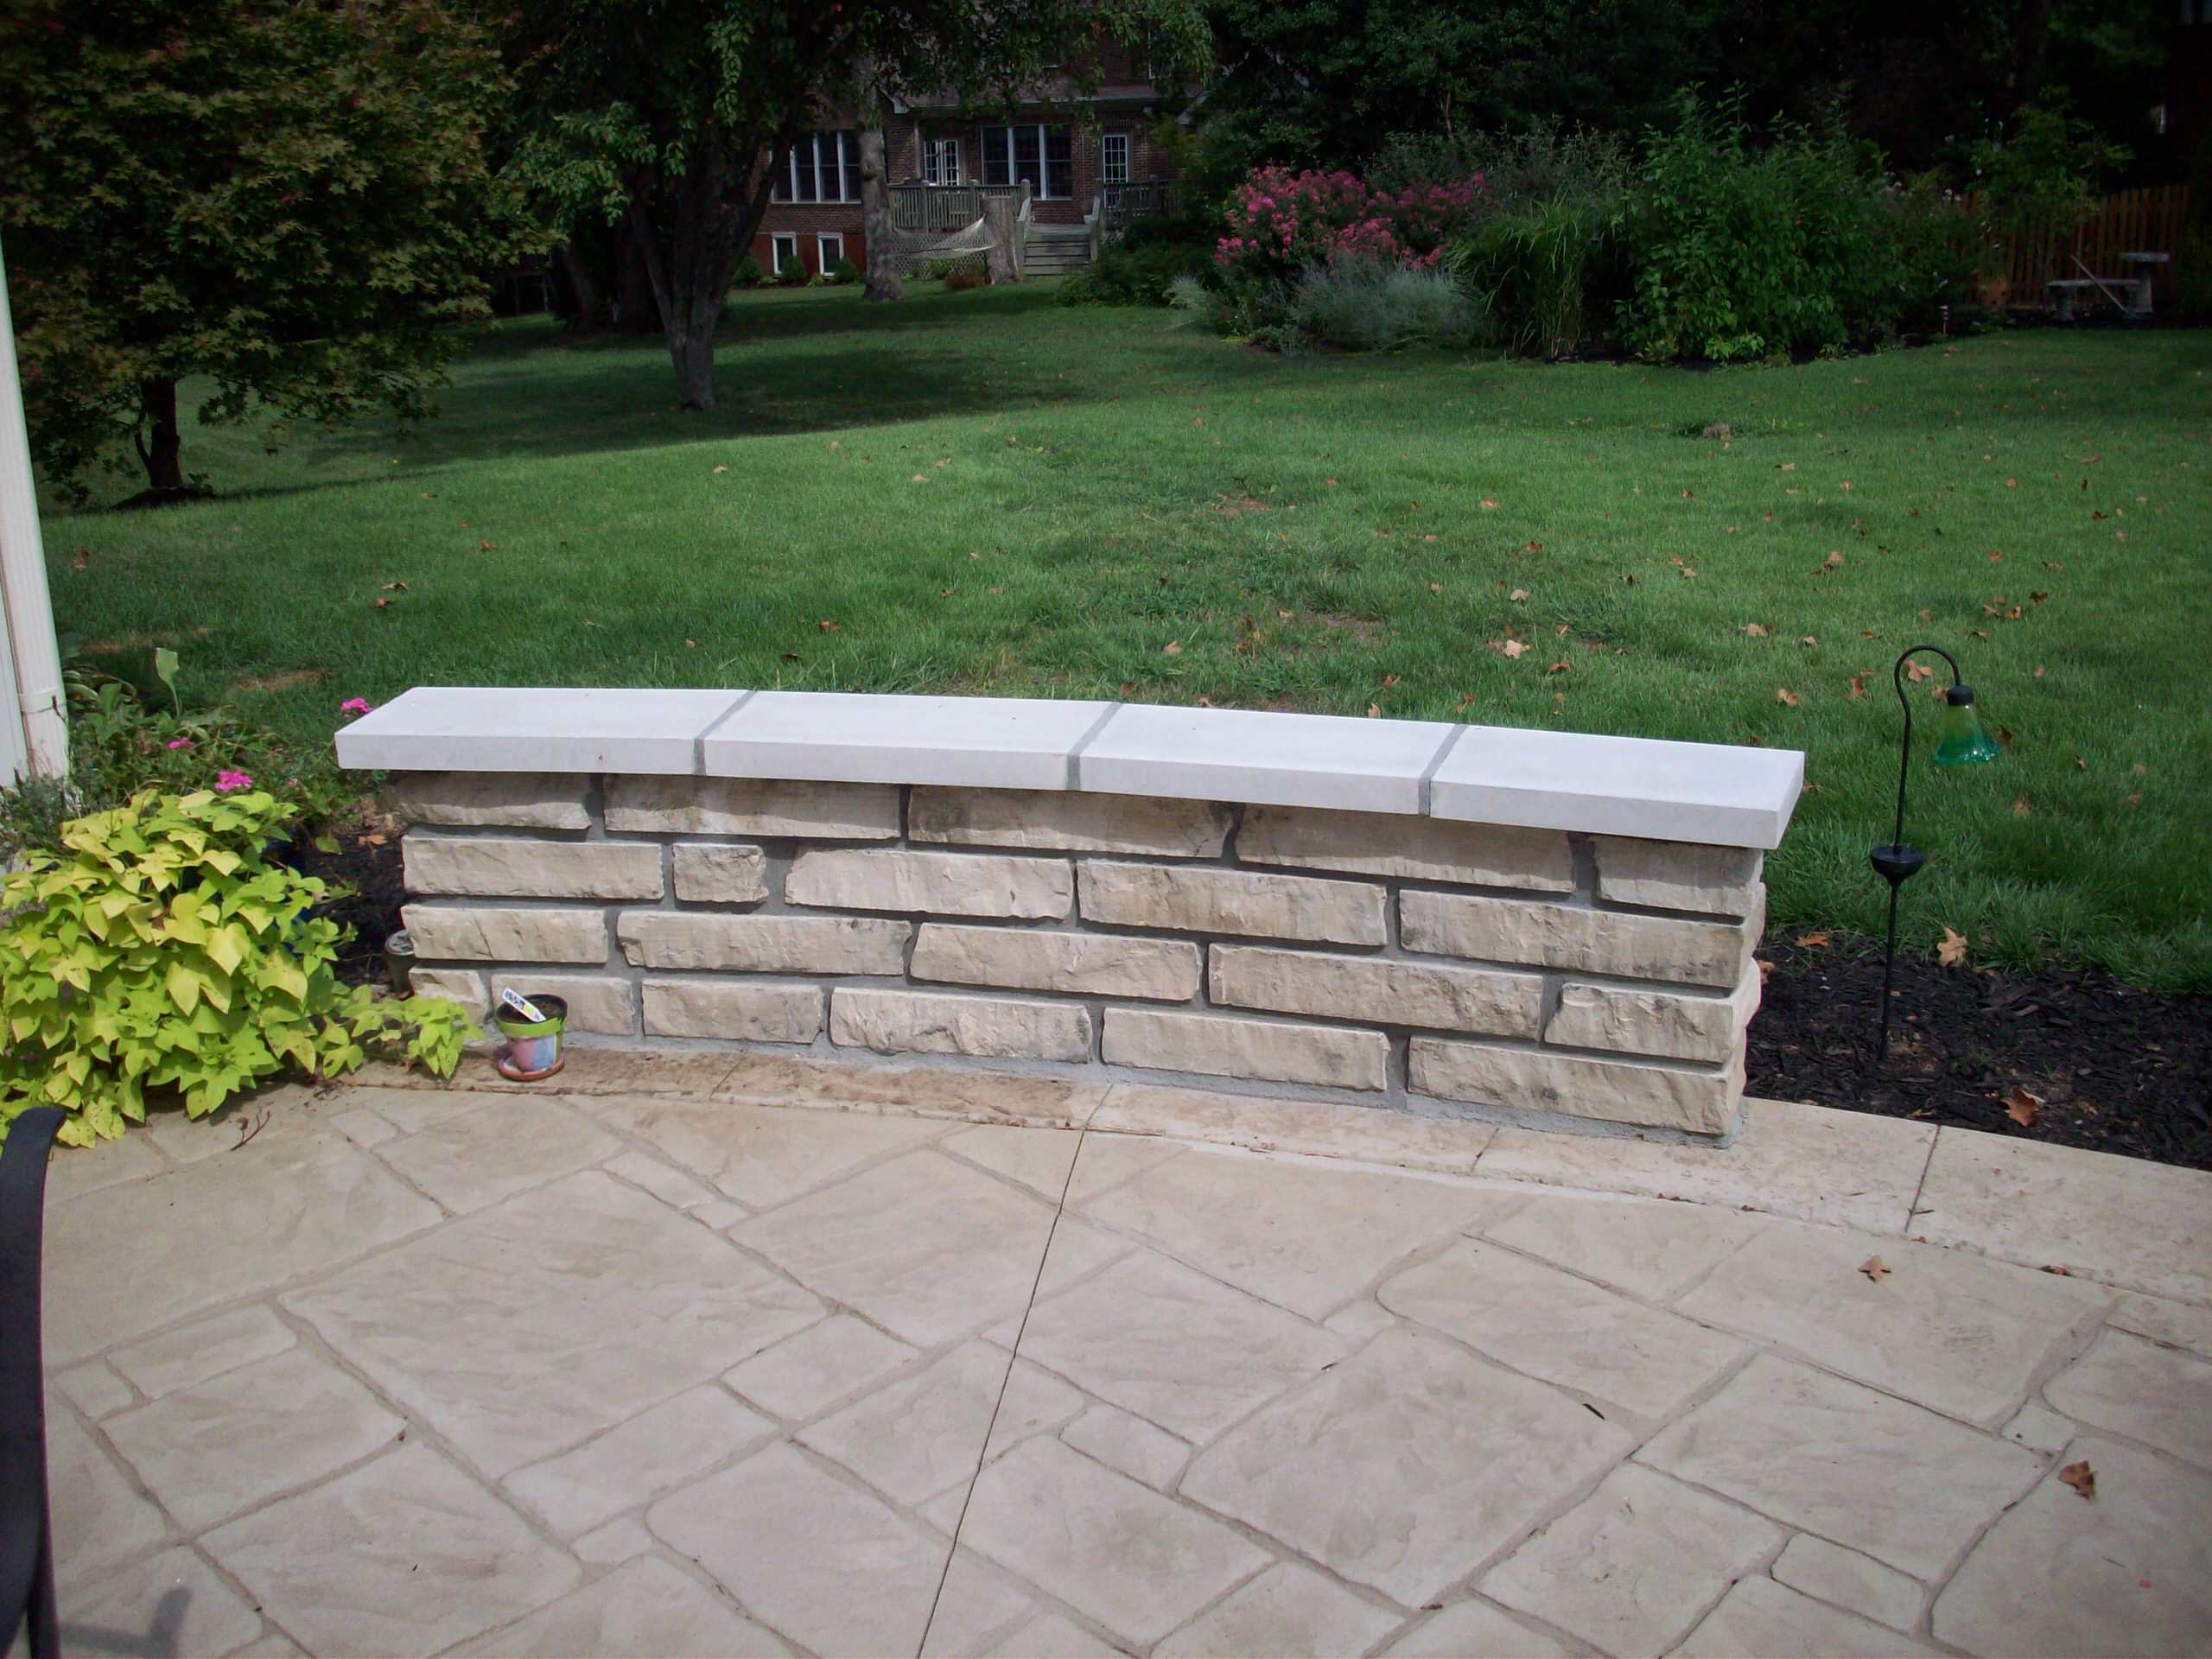 Webster Groves, Missouri Aux Vases Limestone Masonry Sitting Wall with Indiana L